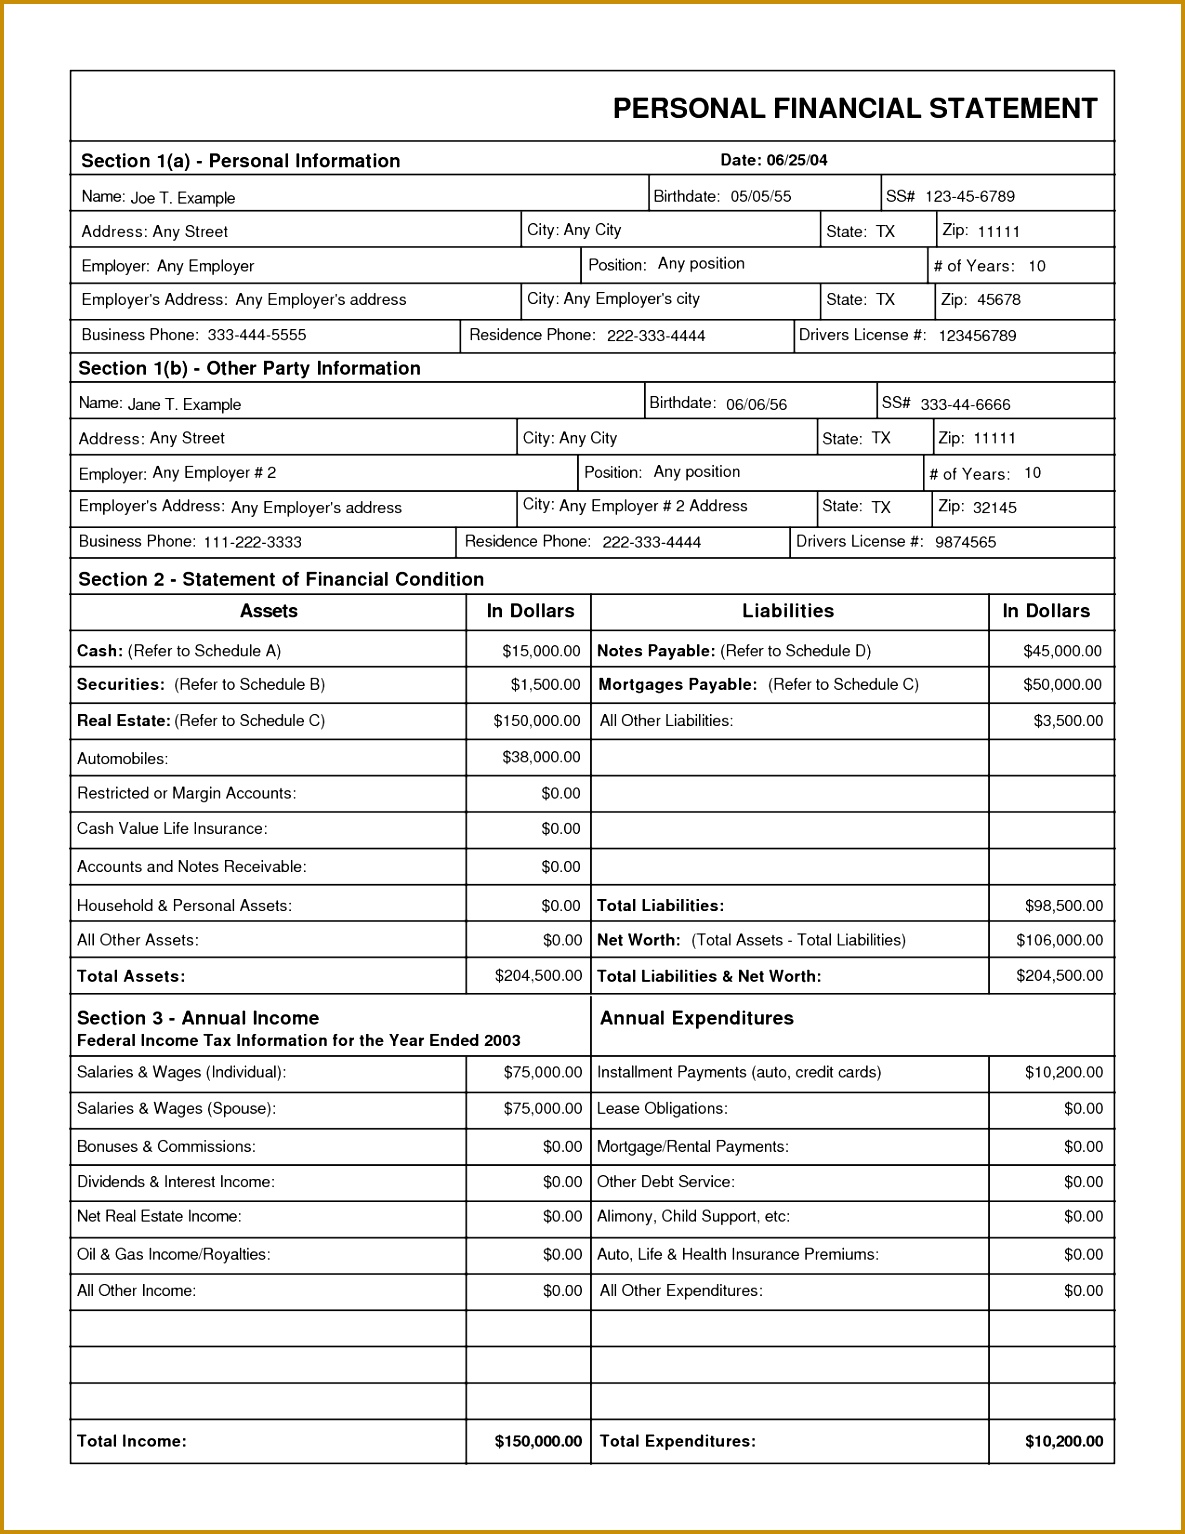 Personal Financial Statement Templates 9 Download Free View r 15341185